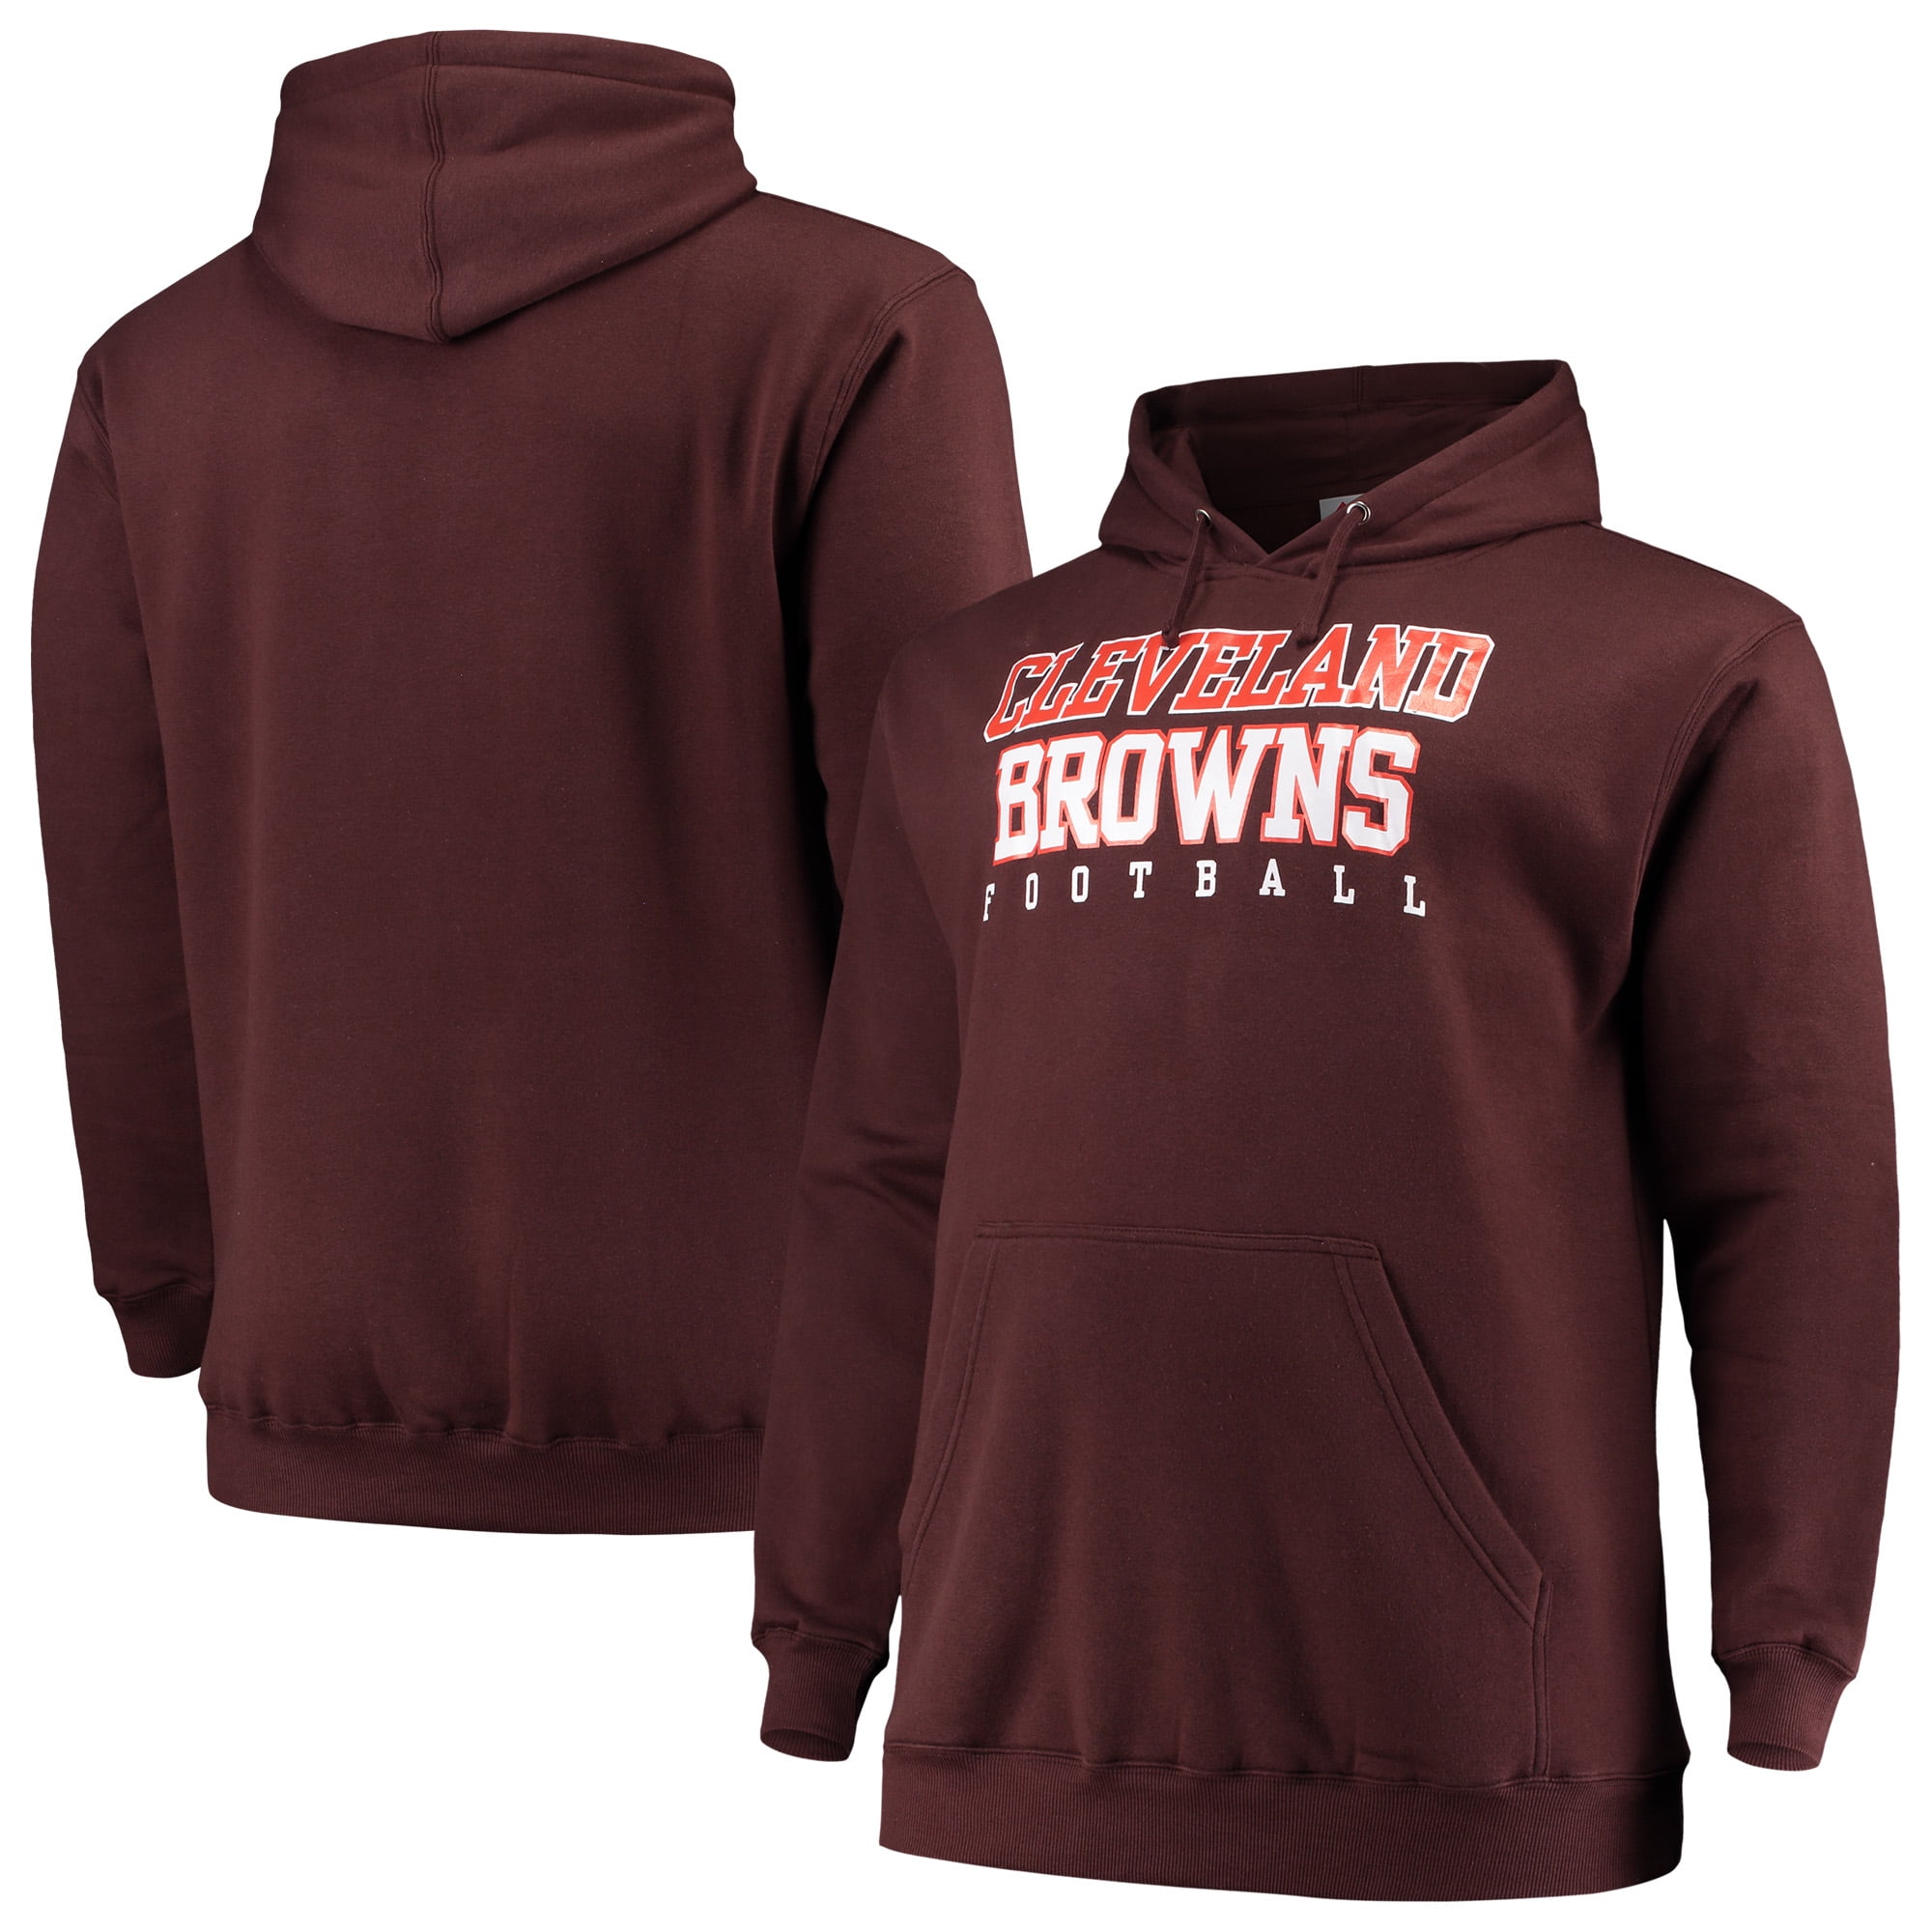 Big \u0026 Tall Stacked Pullover Hoodie 